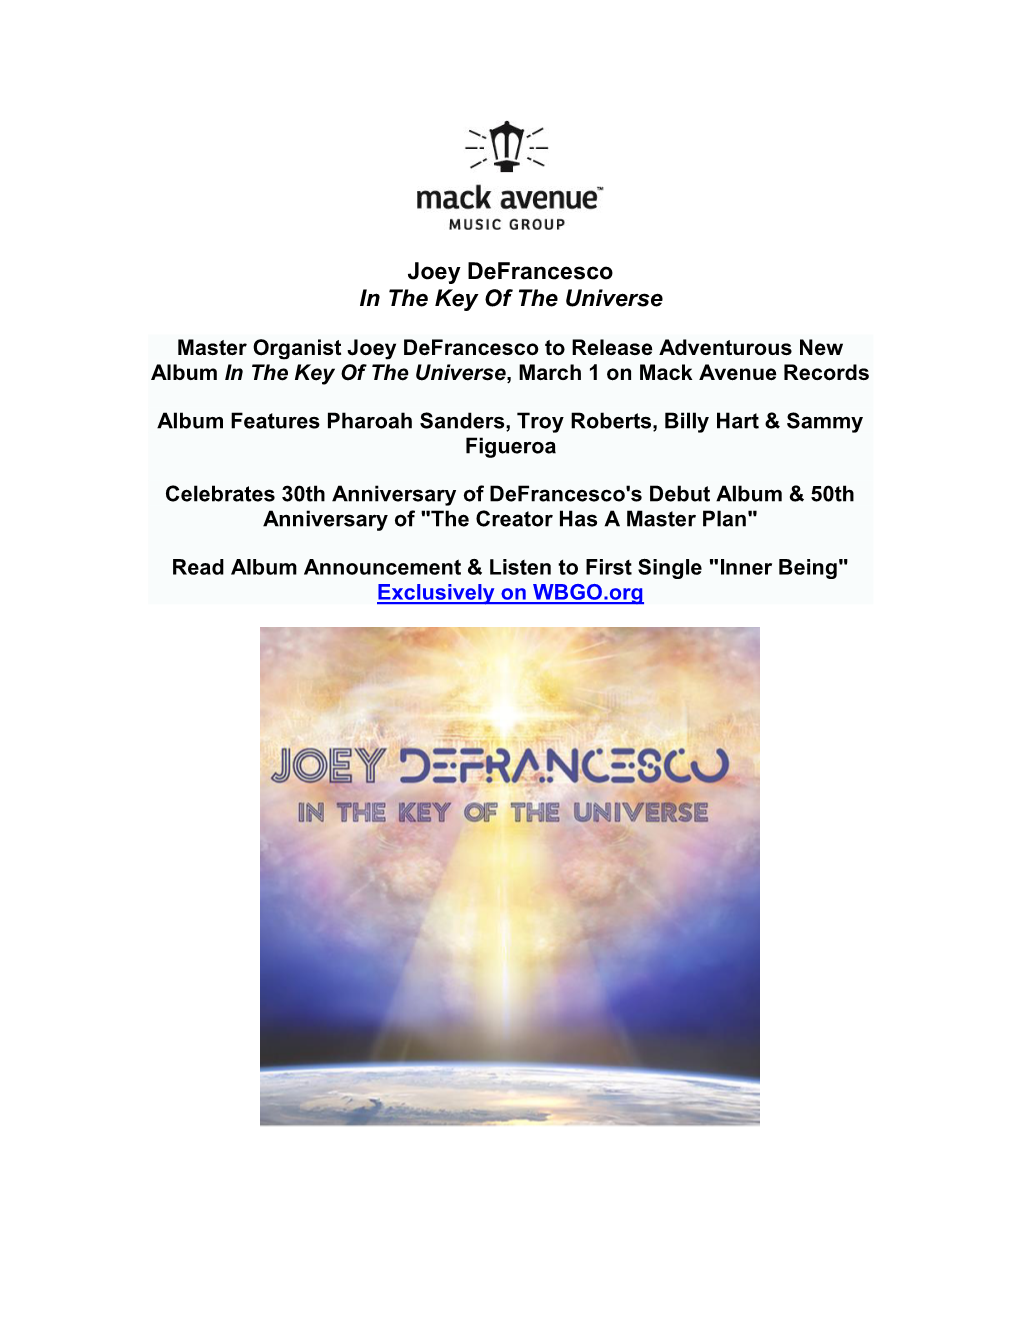 Joey Defrancesco in the Key of the Universe